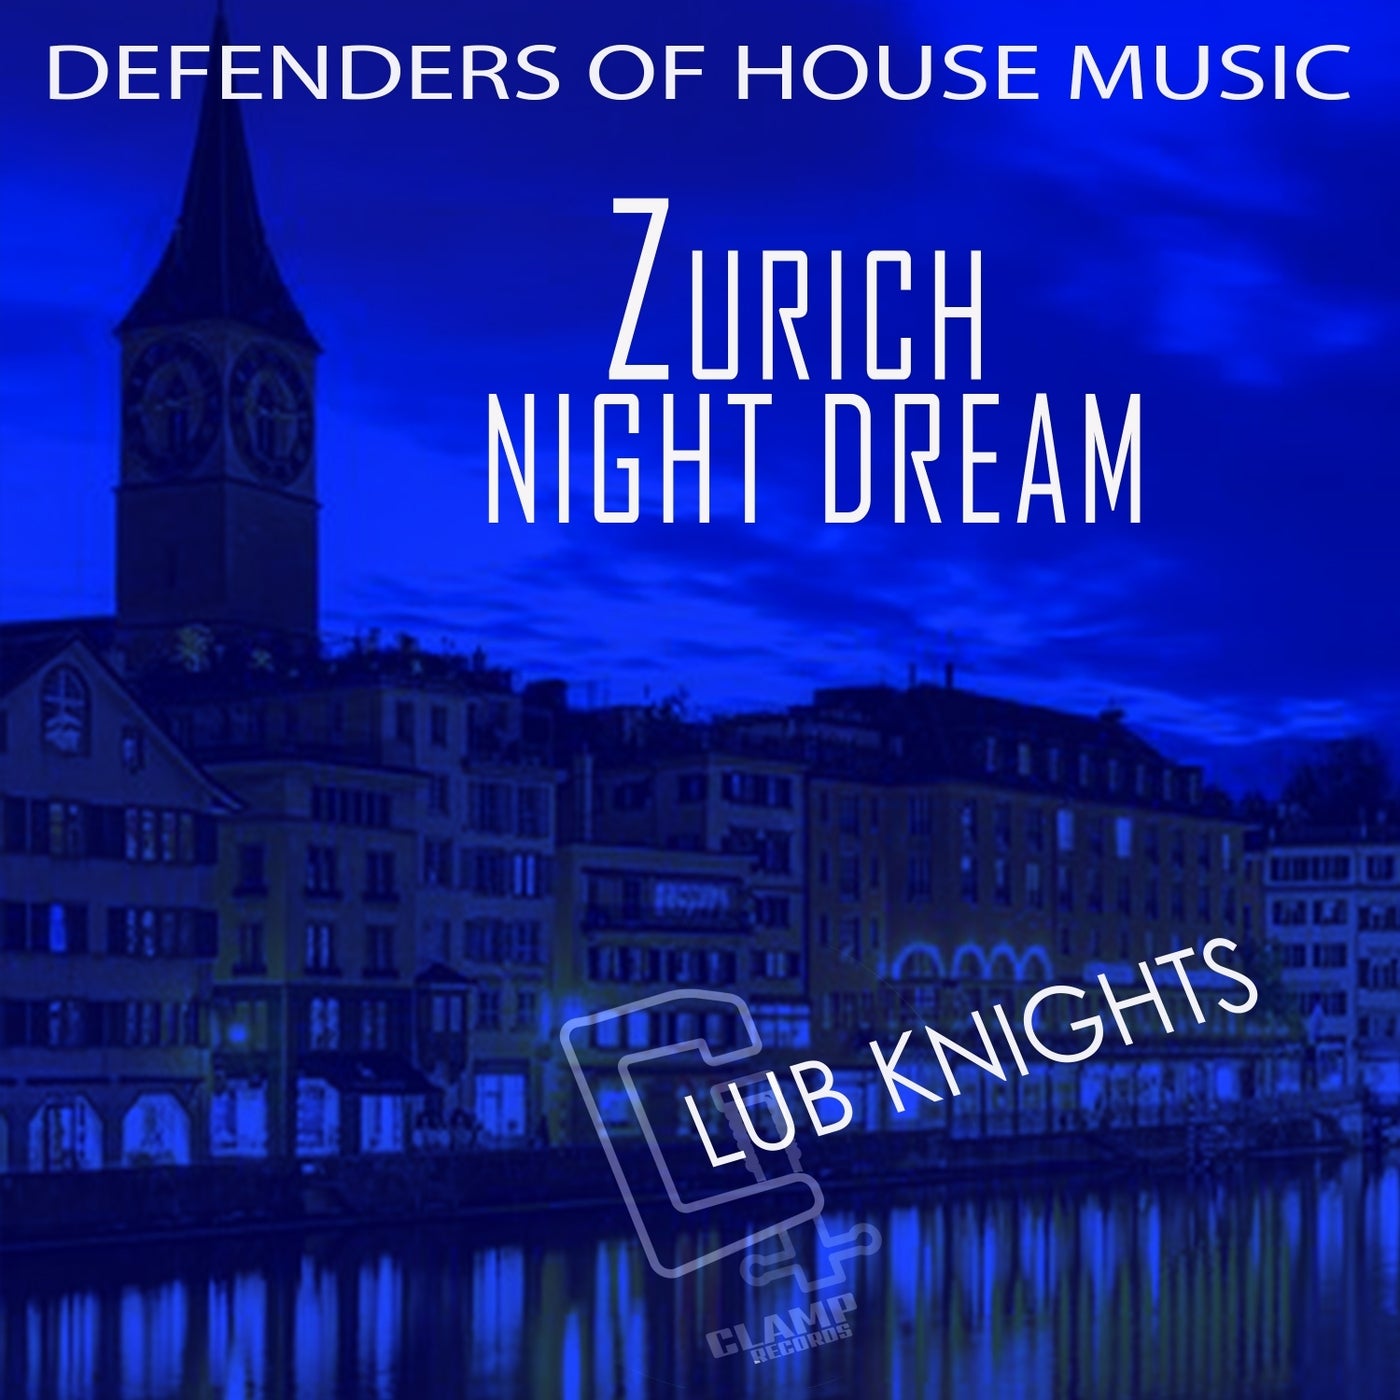 Zurich Night Dream - Club Knights from Clamp records on Beatport